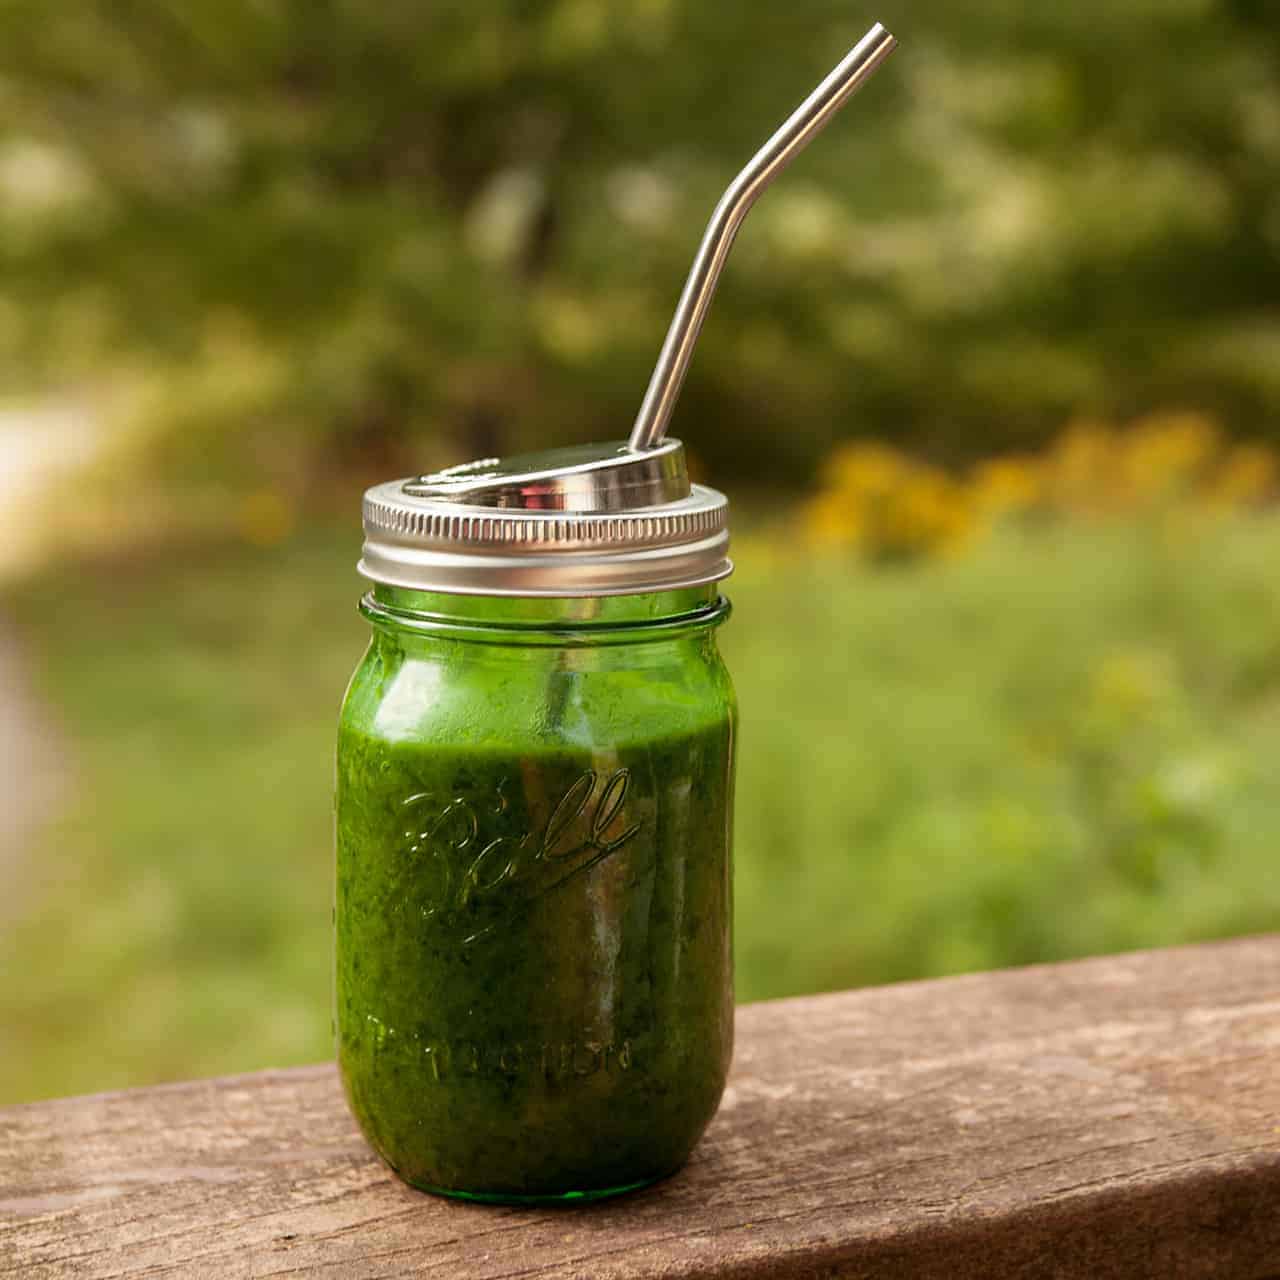 A jar with a straw and green juice on a wooden platform with trees and grass in the background